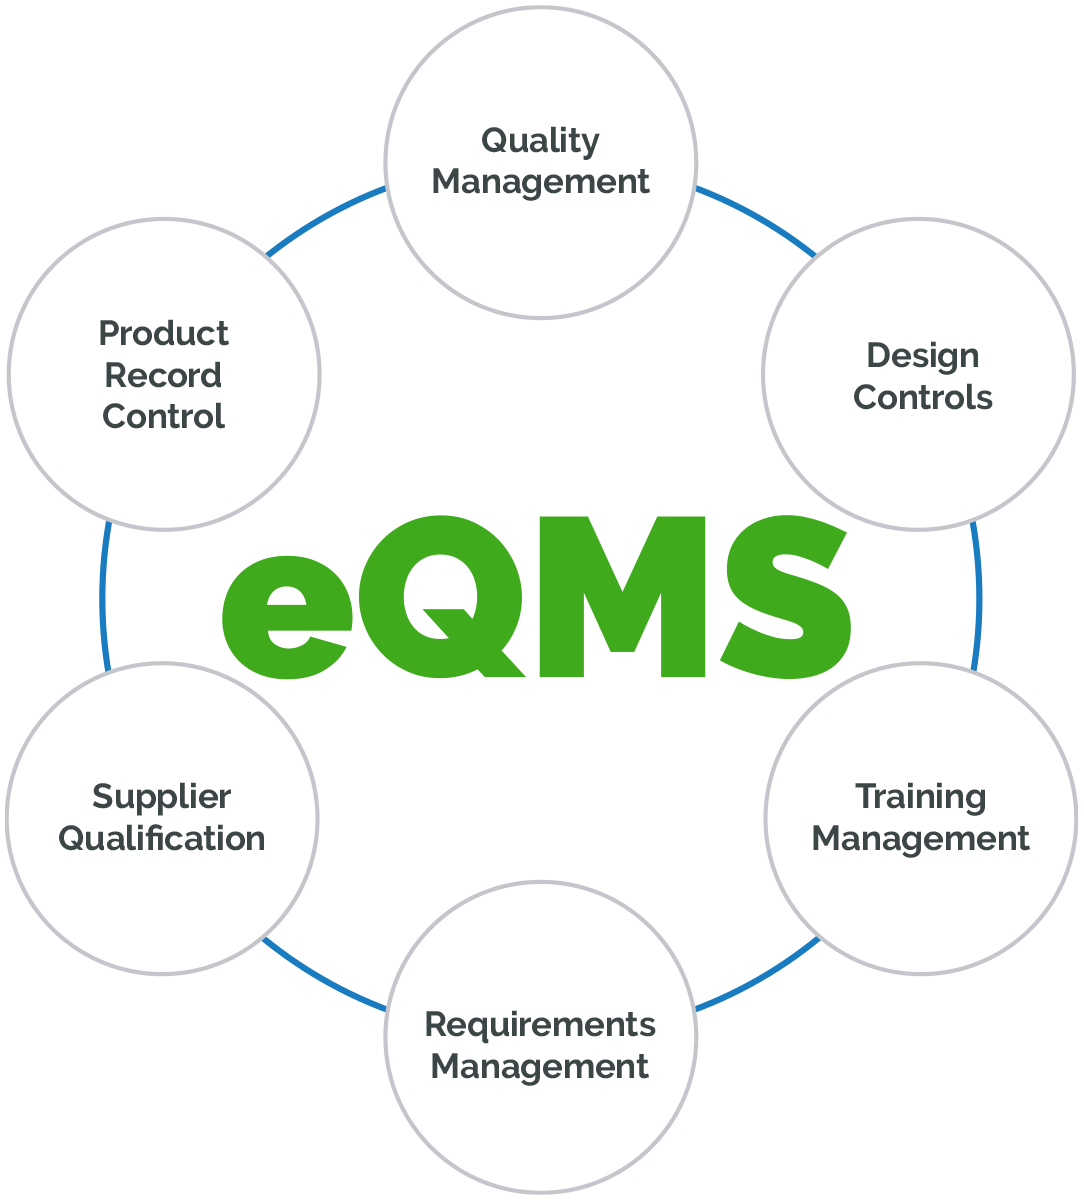 What is a Enterprise Quality Management System